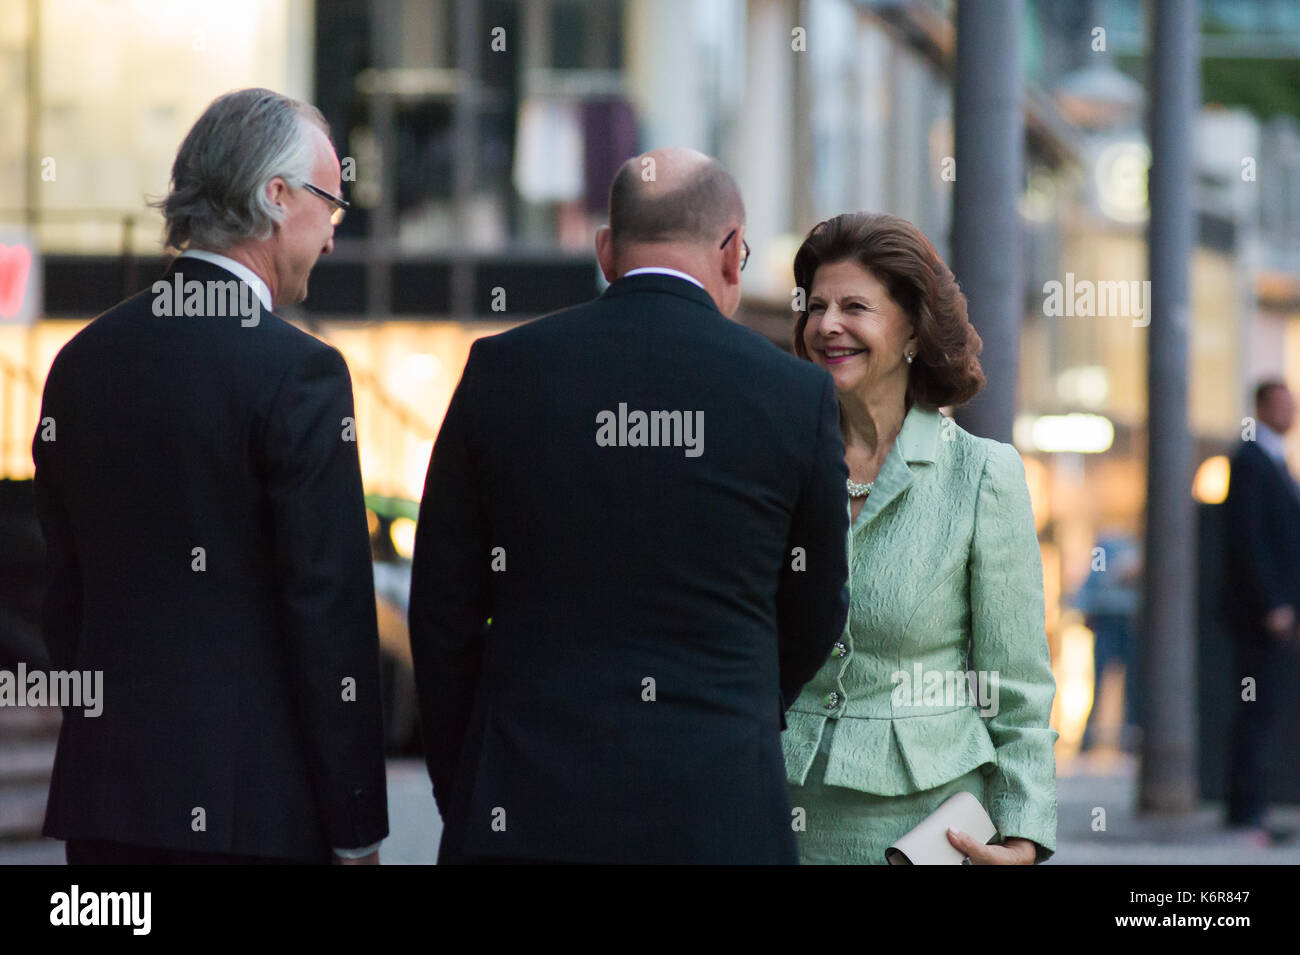 Stockholm, Sweden, 12th September, 2017. Opening of the Riksdag. Tonights concert at Stockholm Concert Hall, due to the opening of the Riksdag. First Speaker of the Riksdag Urban Ahlin, welcomes Queen Silvia. Credit: Barbro Bergfeldt/Alamy Live News Stock Photo